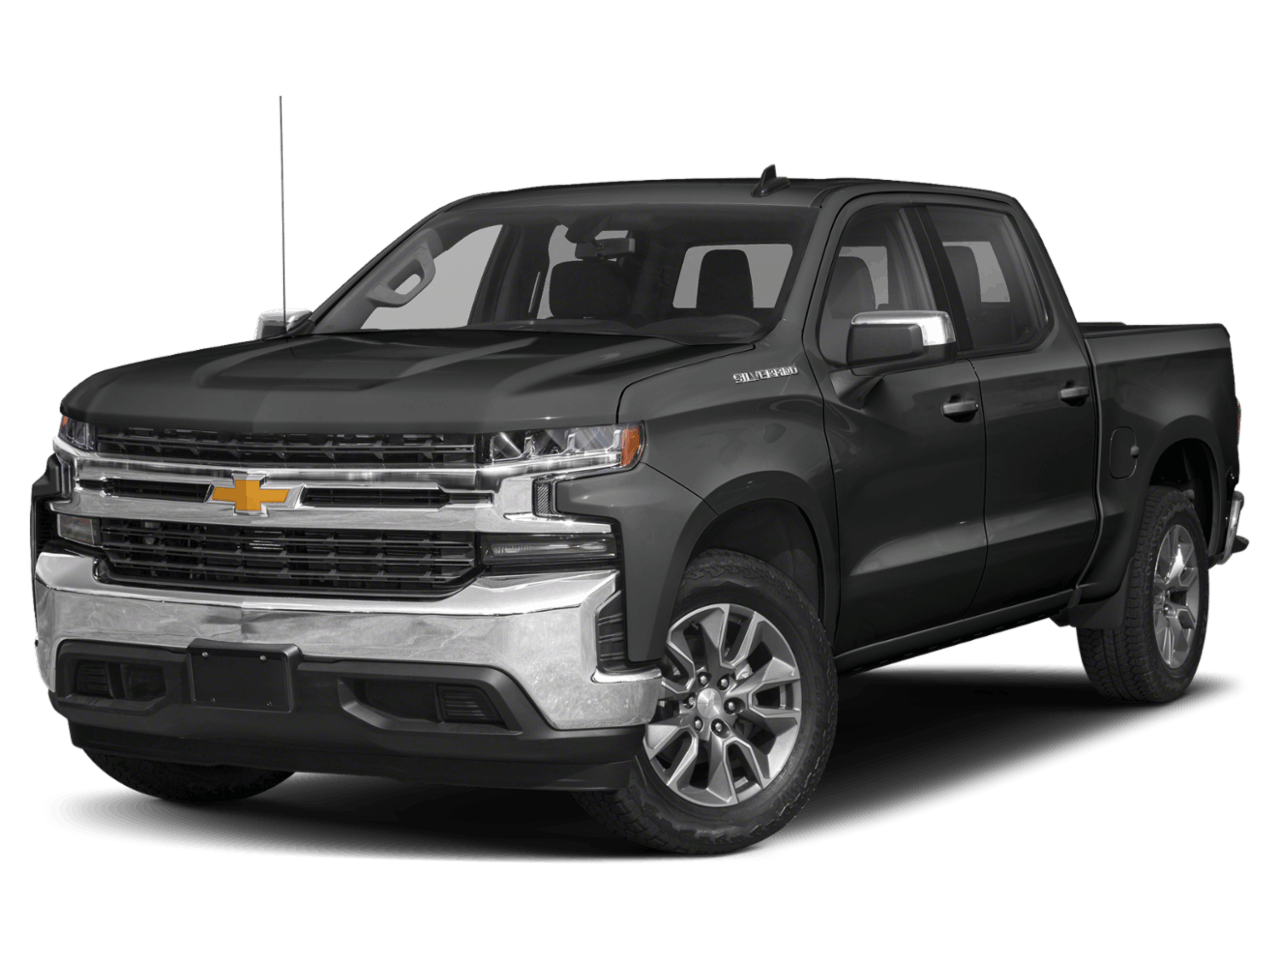 Used 2021 Chevrolet Silverado 1500 RST with VIN 1GCUYEET6MZ440154 for sale in Waite Park, Minnesota